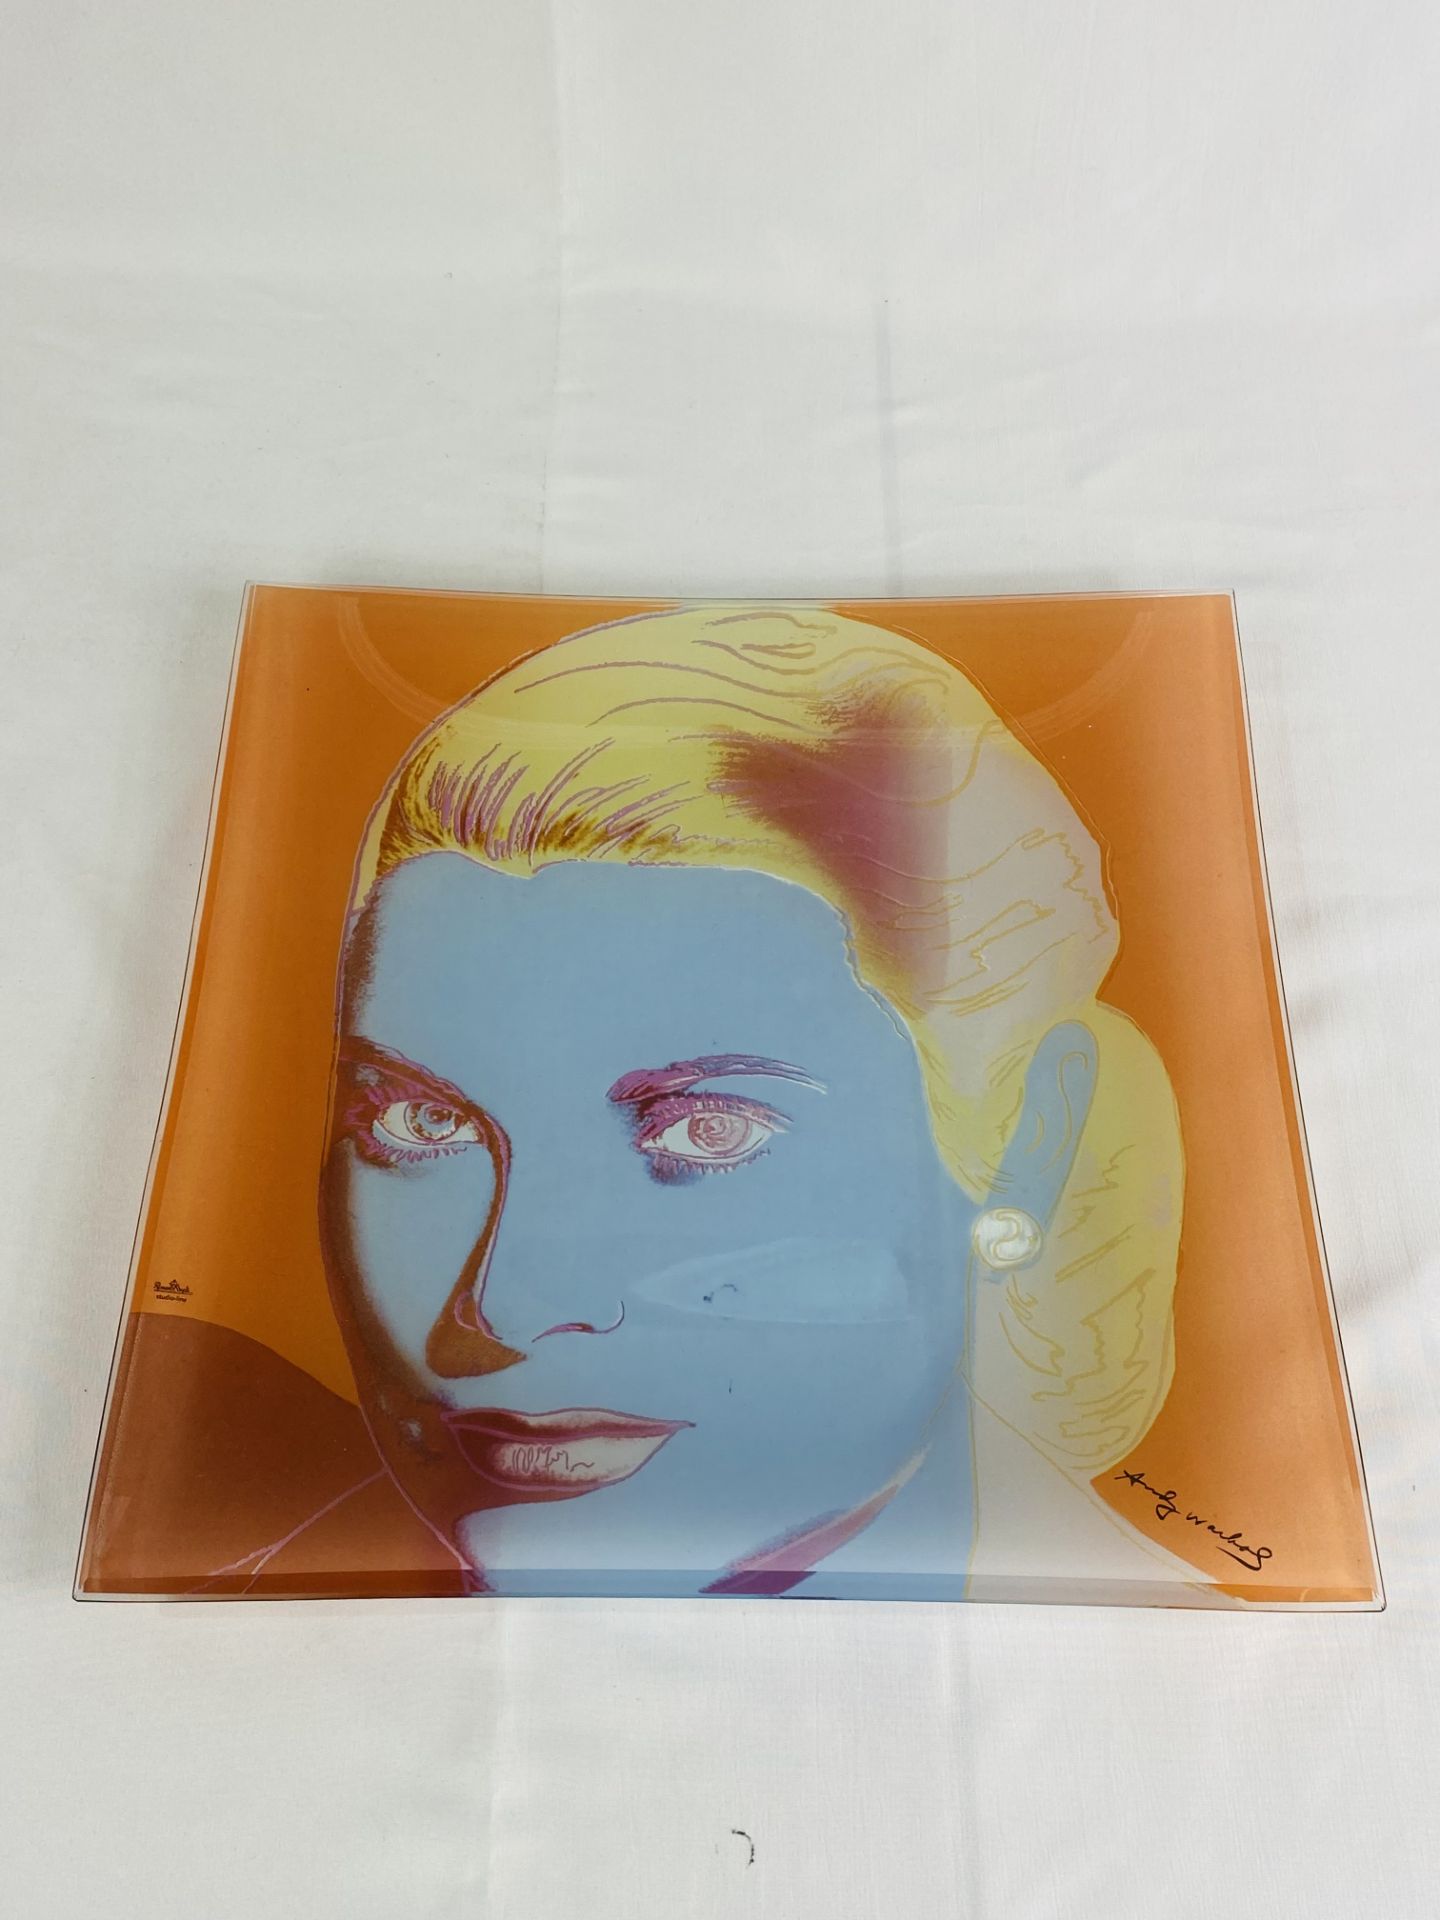 Rosenthal Andy Warhol glass dish of Grace Kelly - Image 2 of 2